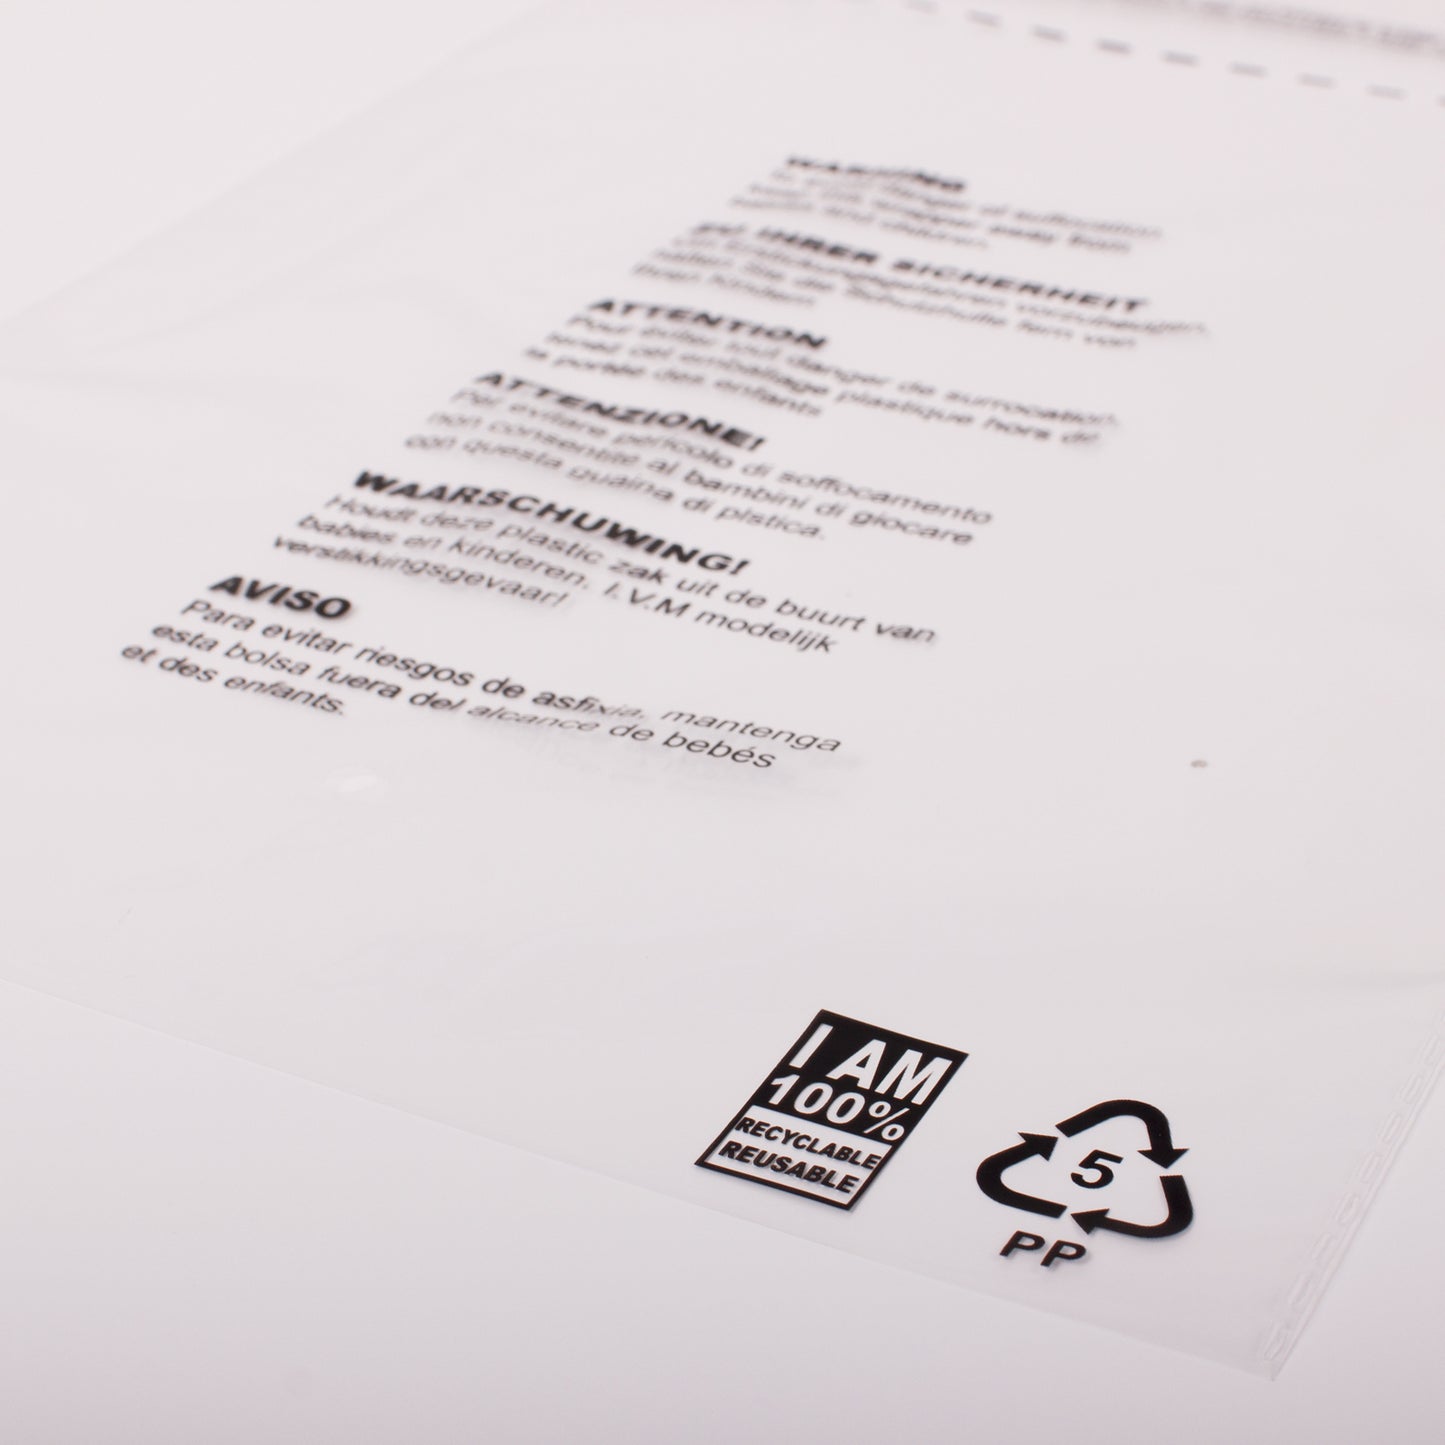 10 x 14 Clear Mailing Bag with 'I AM 100% RECYCLABLE'